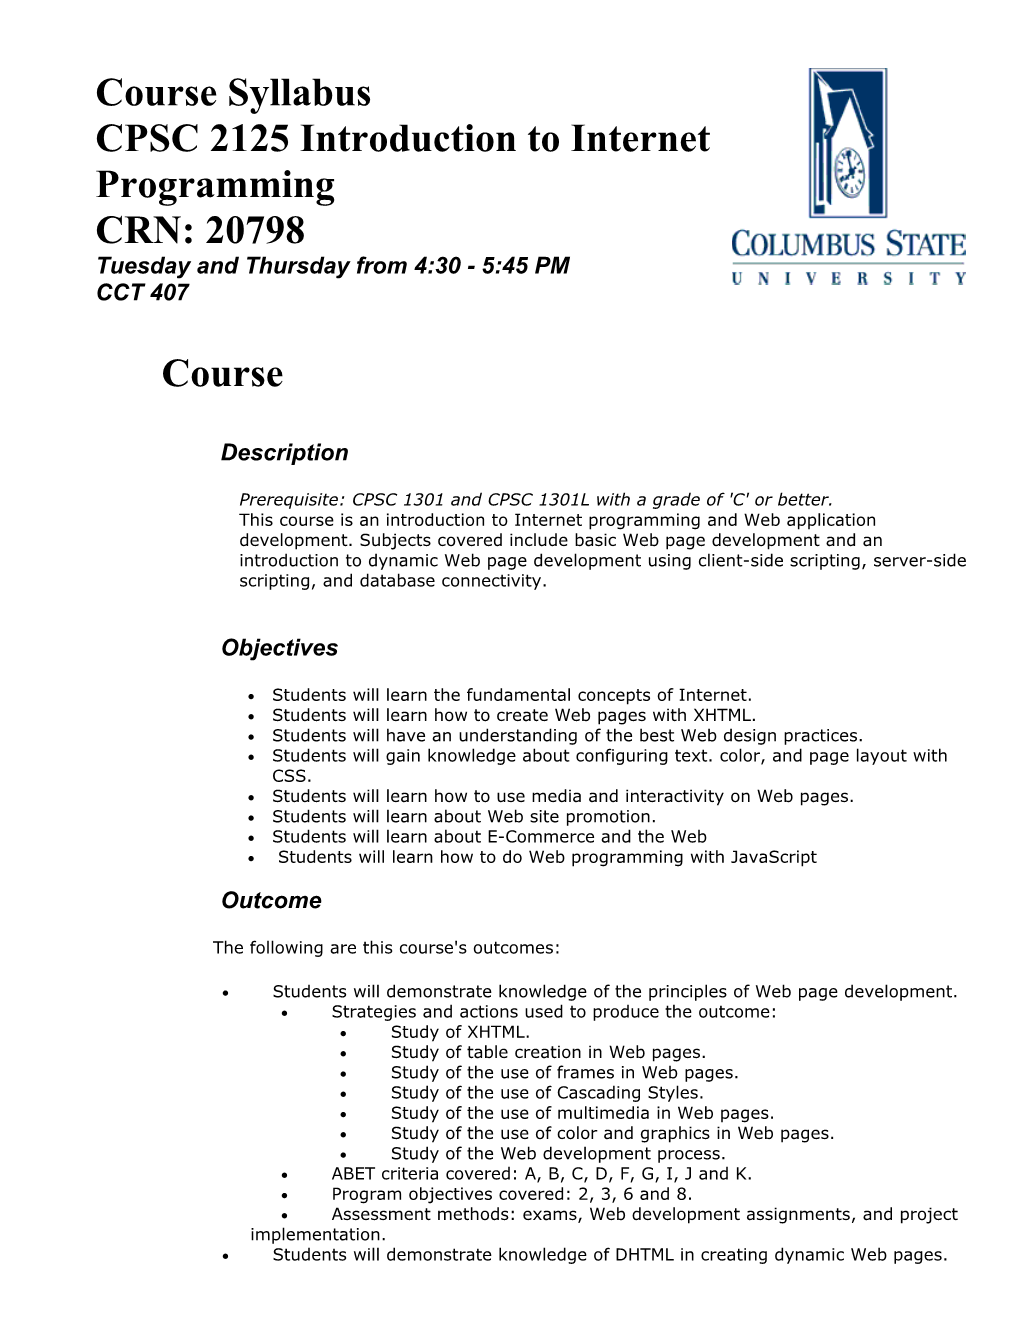 Course Syllabus CPSC 2125 Introduction to Internet Programming CRN: 20798Tuesday and Thursday